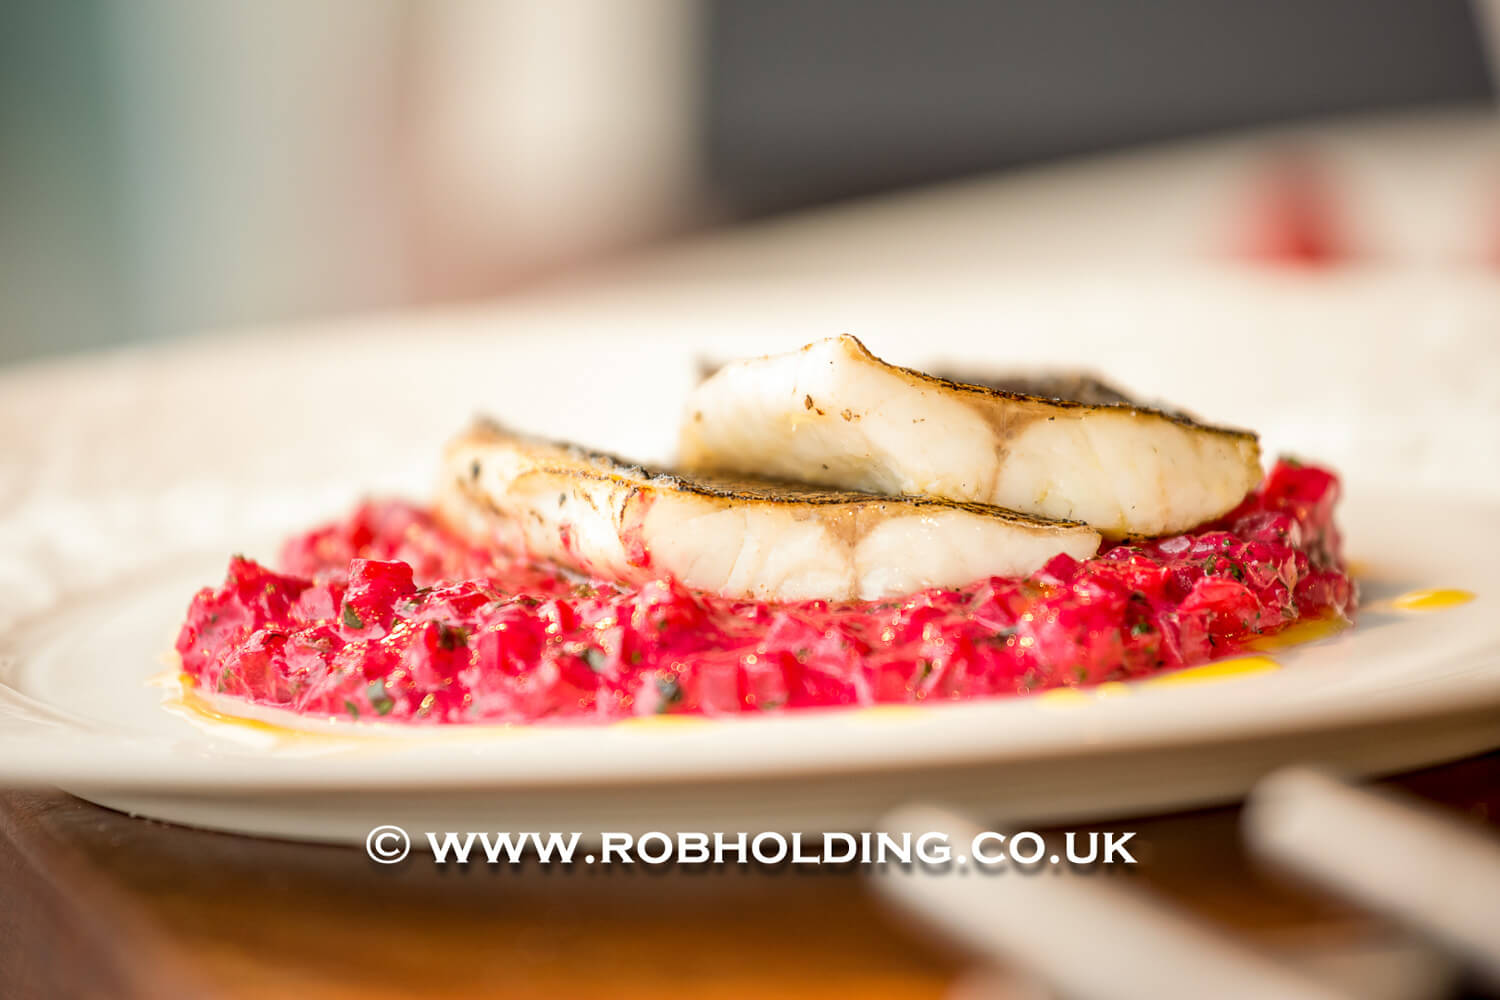 Product & Food Photographer in Cambridge